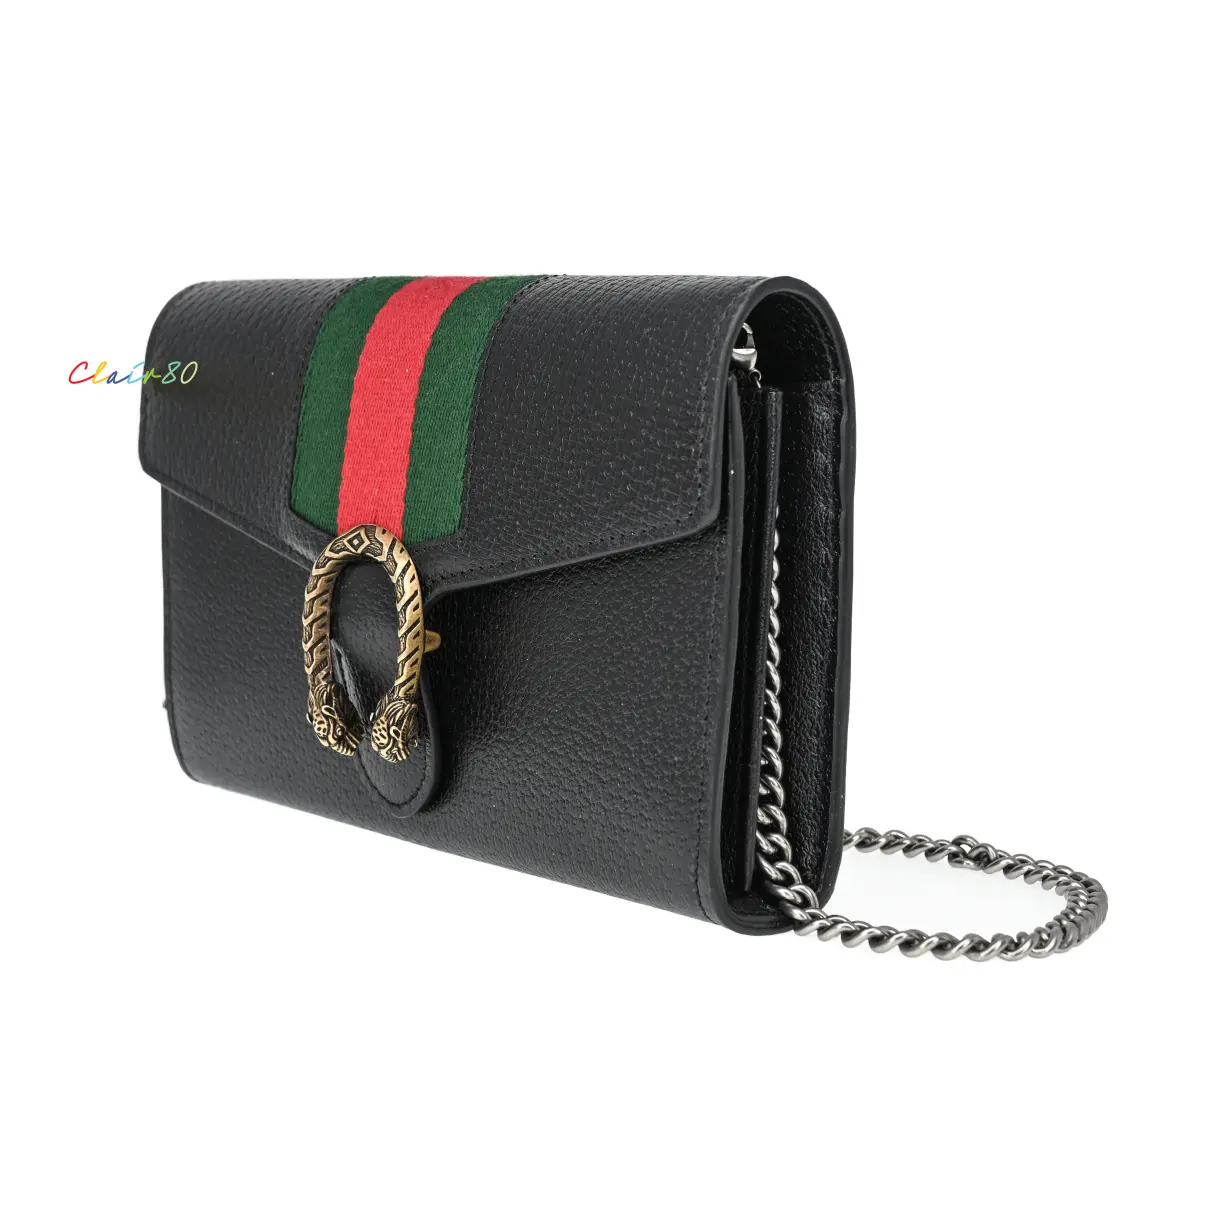 Buy Gucci Dionysus Chain Wallet leather crossbody bag online